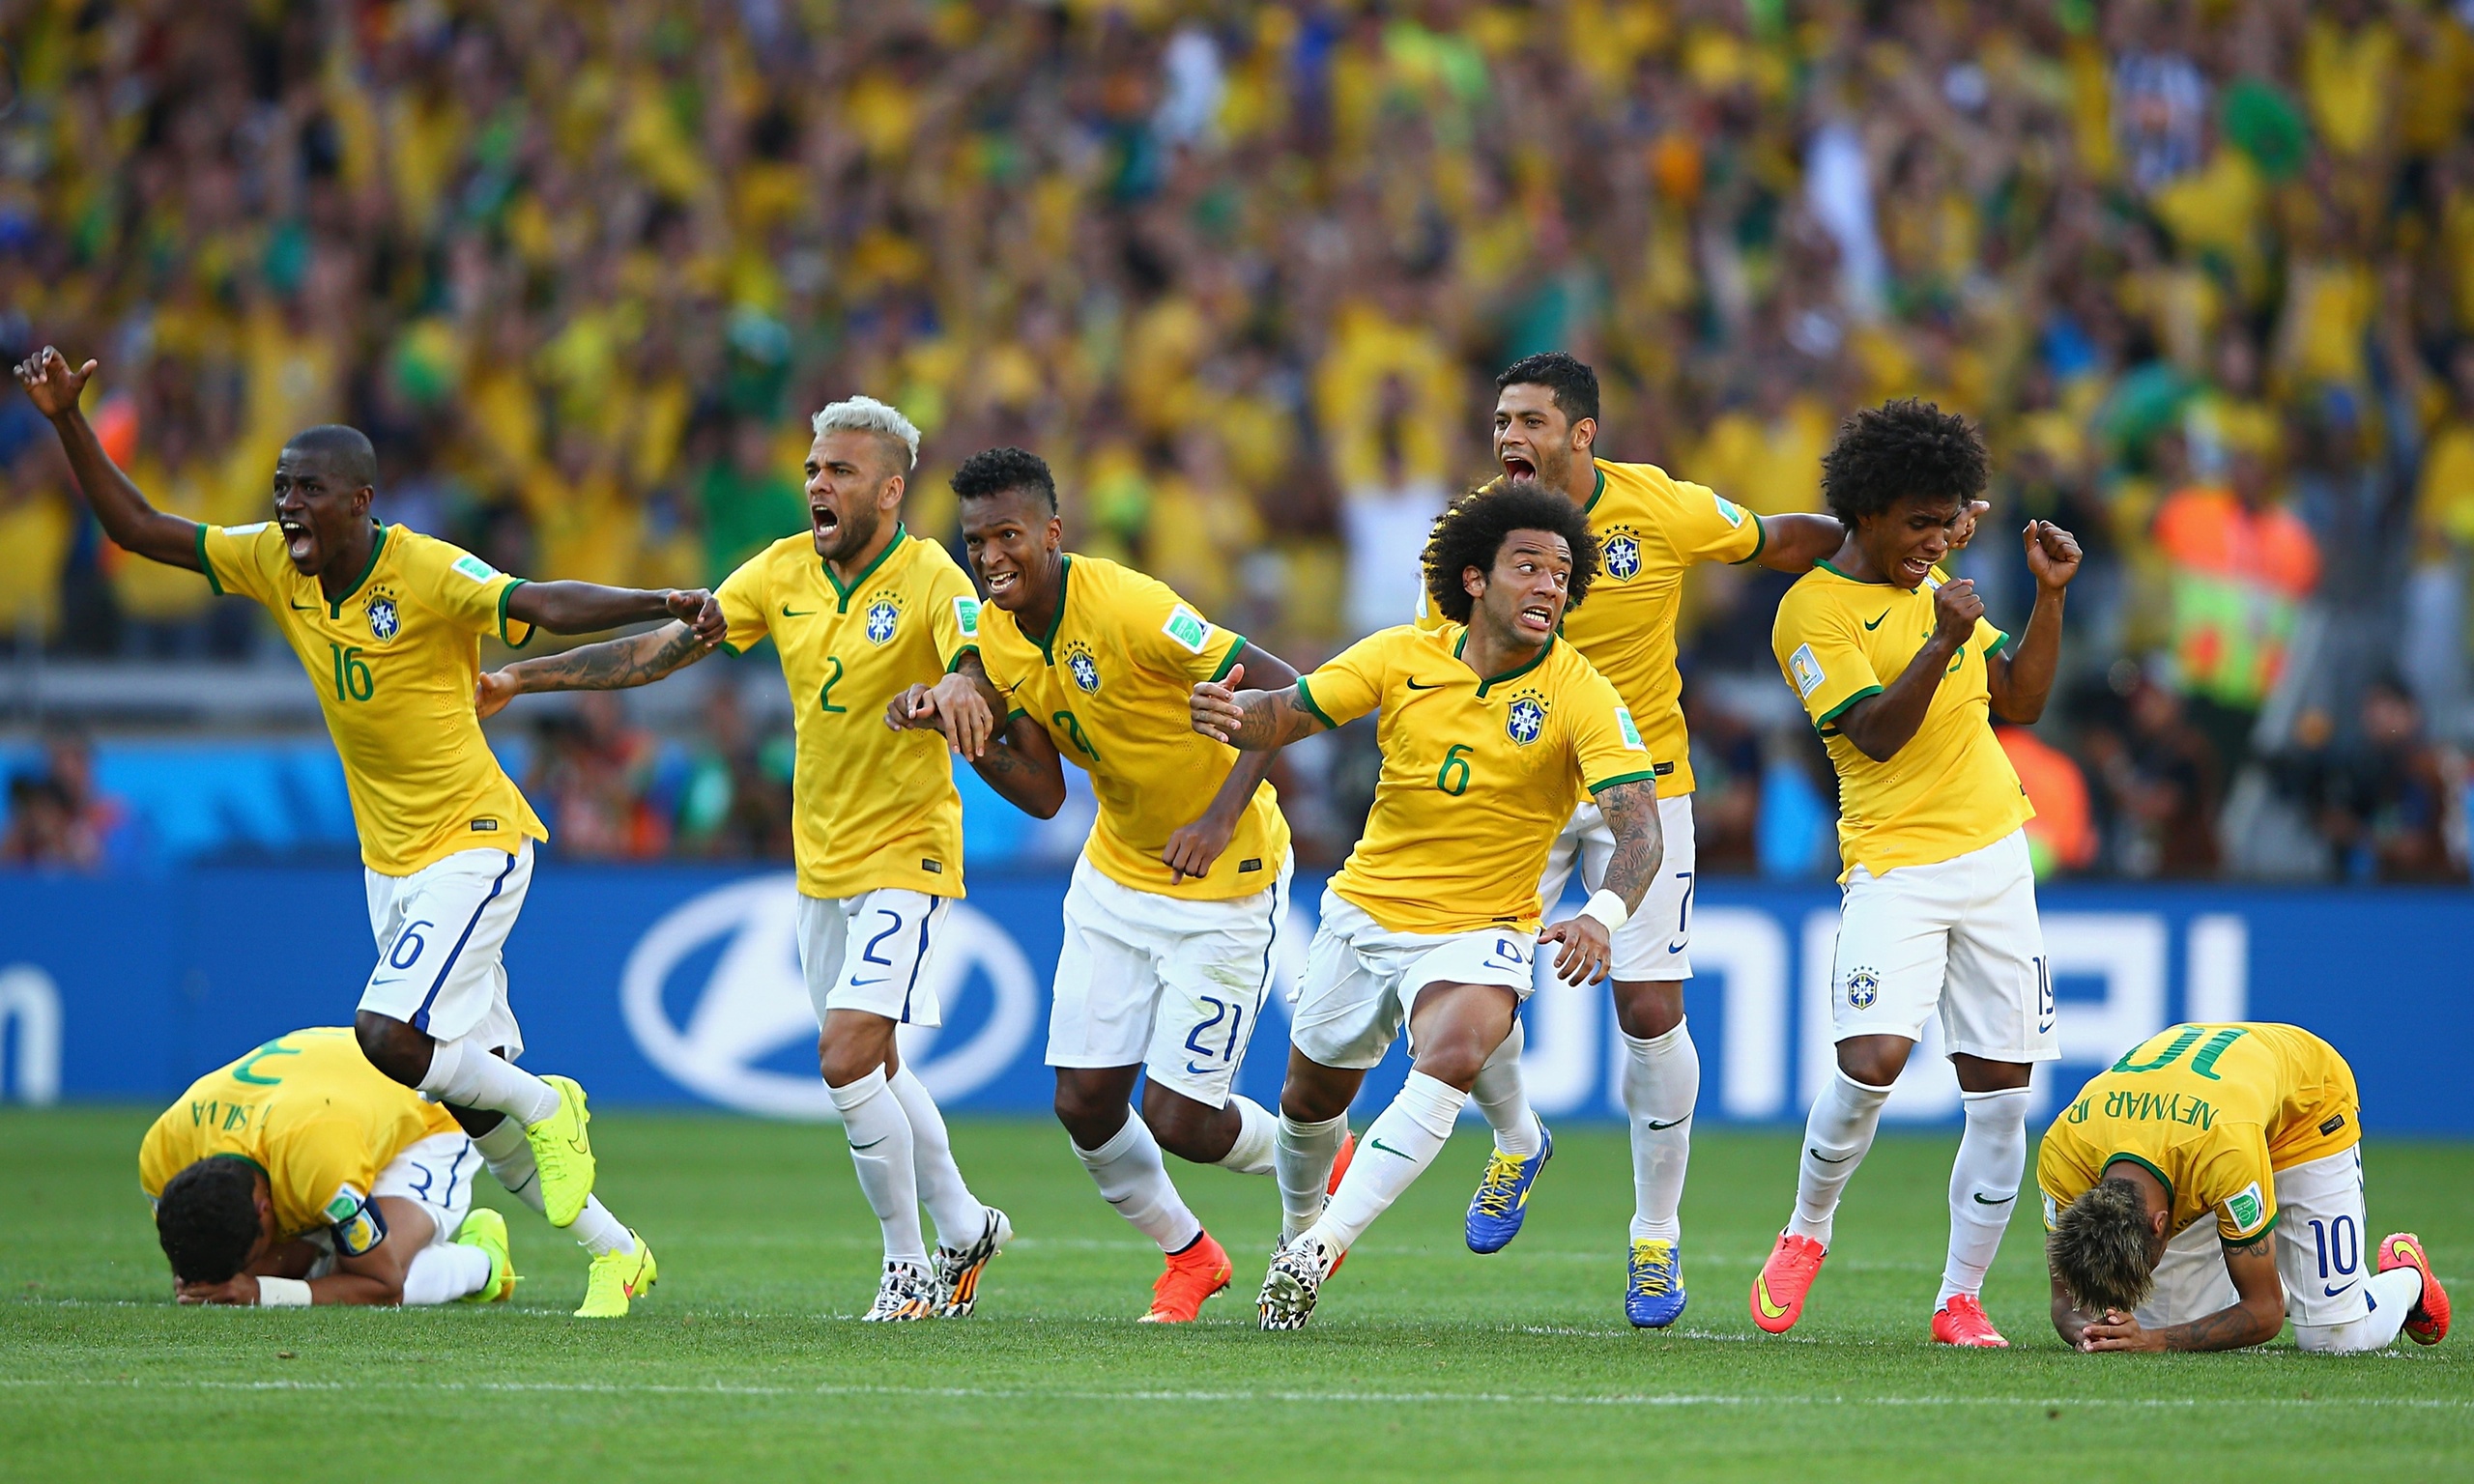 Brazil beat Chile on penalties to reach World Cup quarter-finals